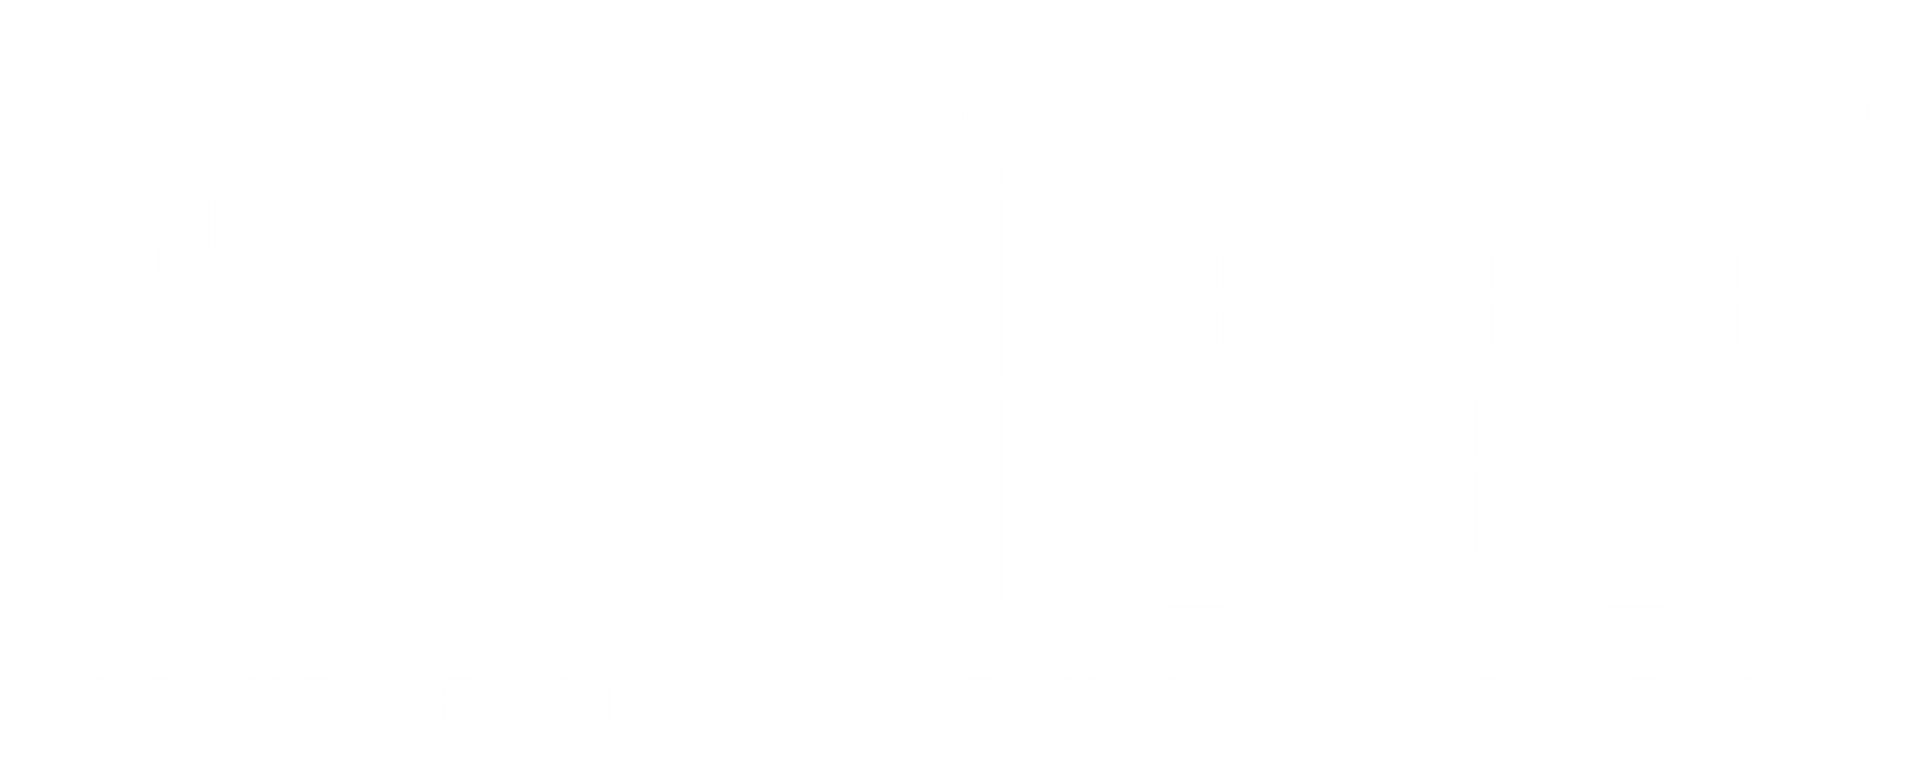 The main logo of the Gunnison Art Center, where members of this Colorado community can come to create, learn, connect, discover, and enjoy.